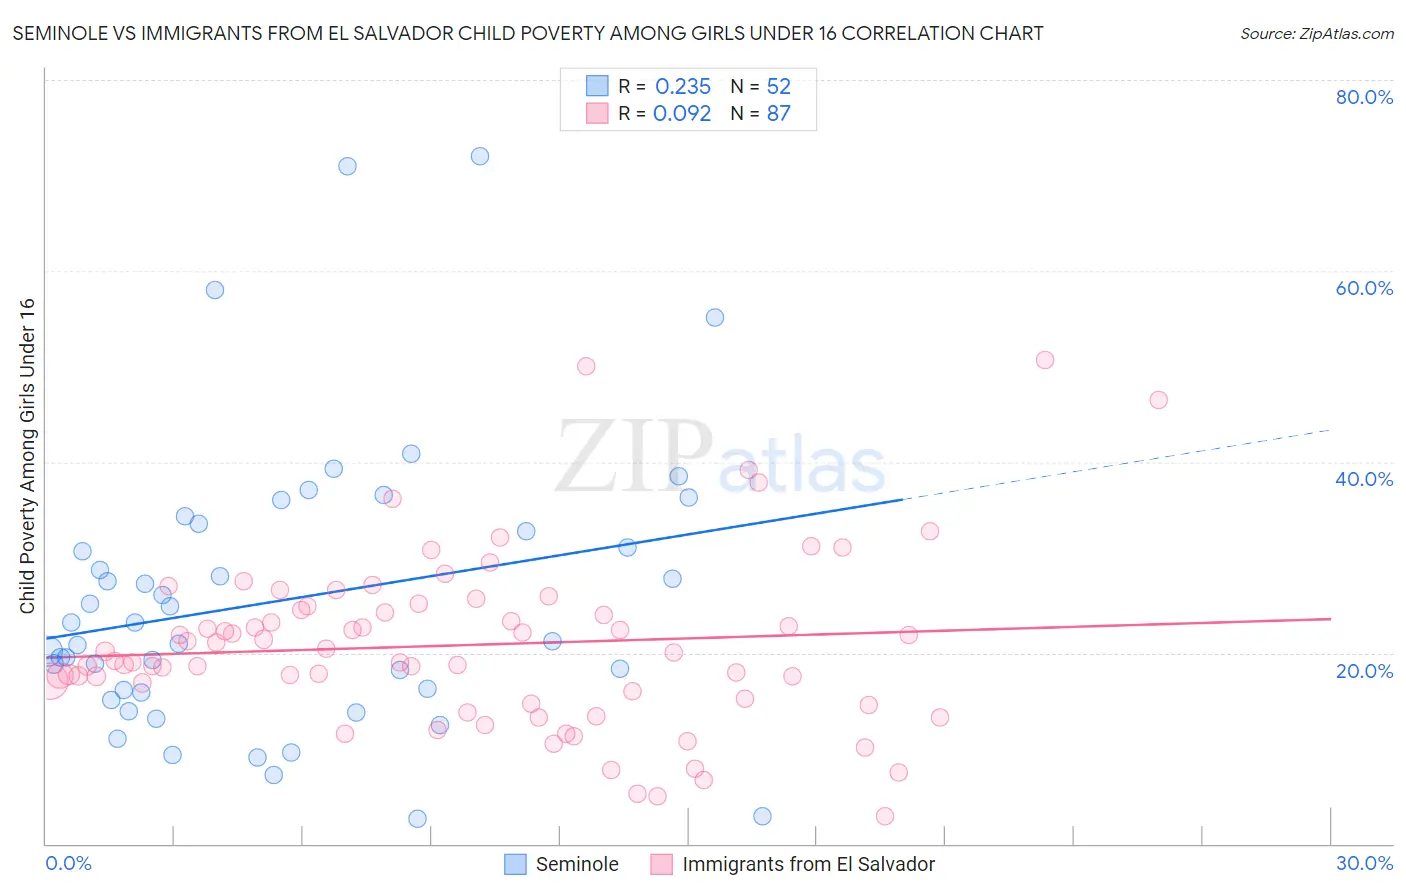 Seminole vs Immigrants from El Salvador Child Poverty Among Girls Under 16